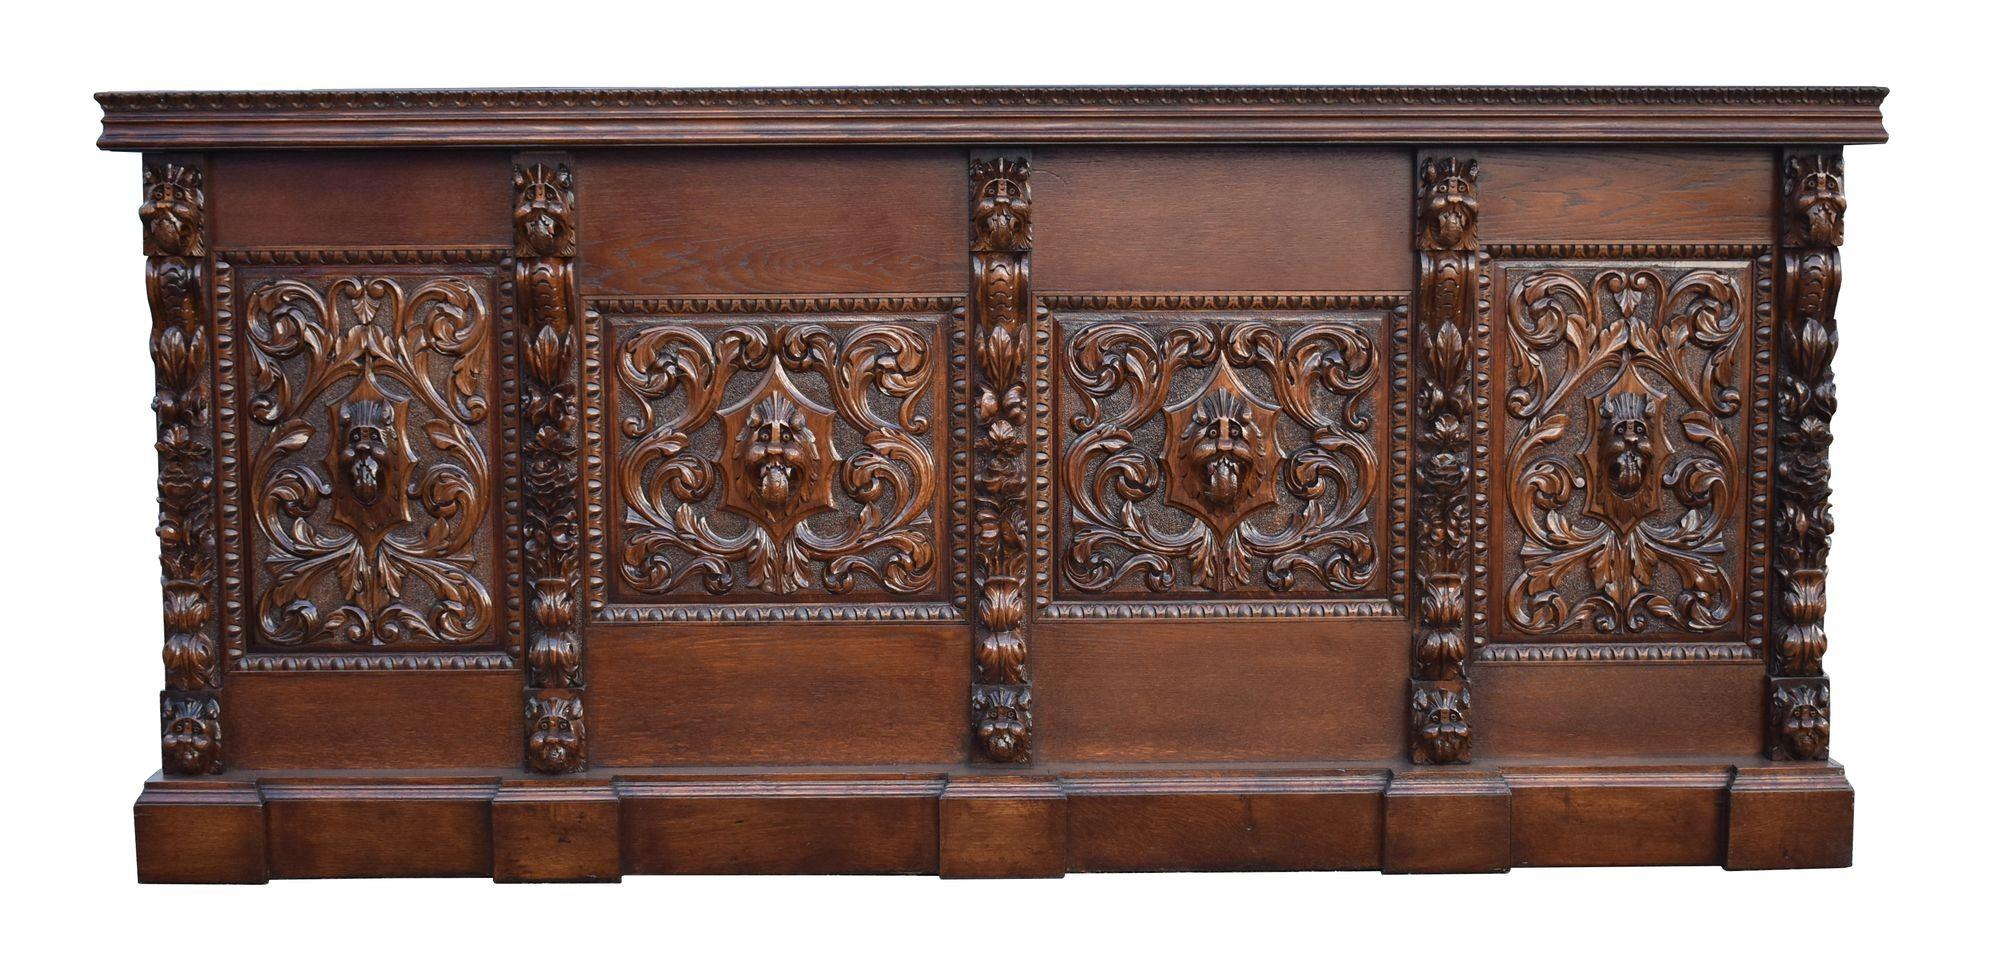 For sale is a good quality carved oak front and back bar, having a stepped and flared cornice above three beveled mirrors flanked by stained glass panels. The back bar has an arrangement of three drawers, three shelves and a lead lined bottle